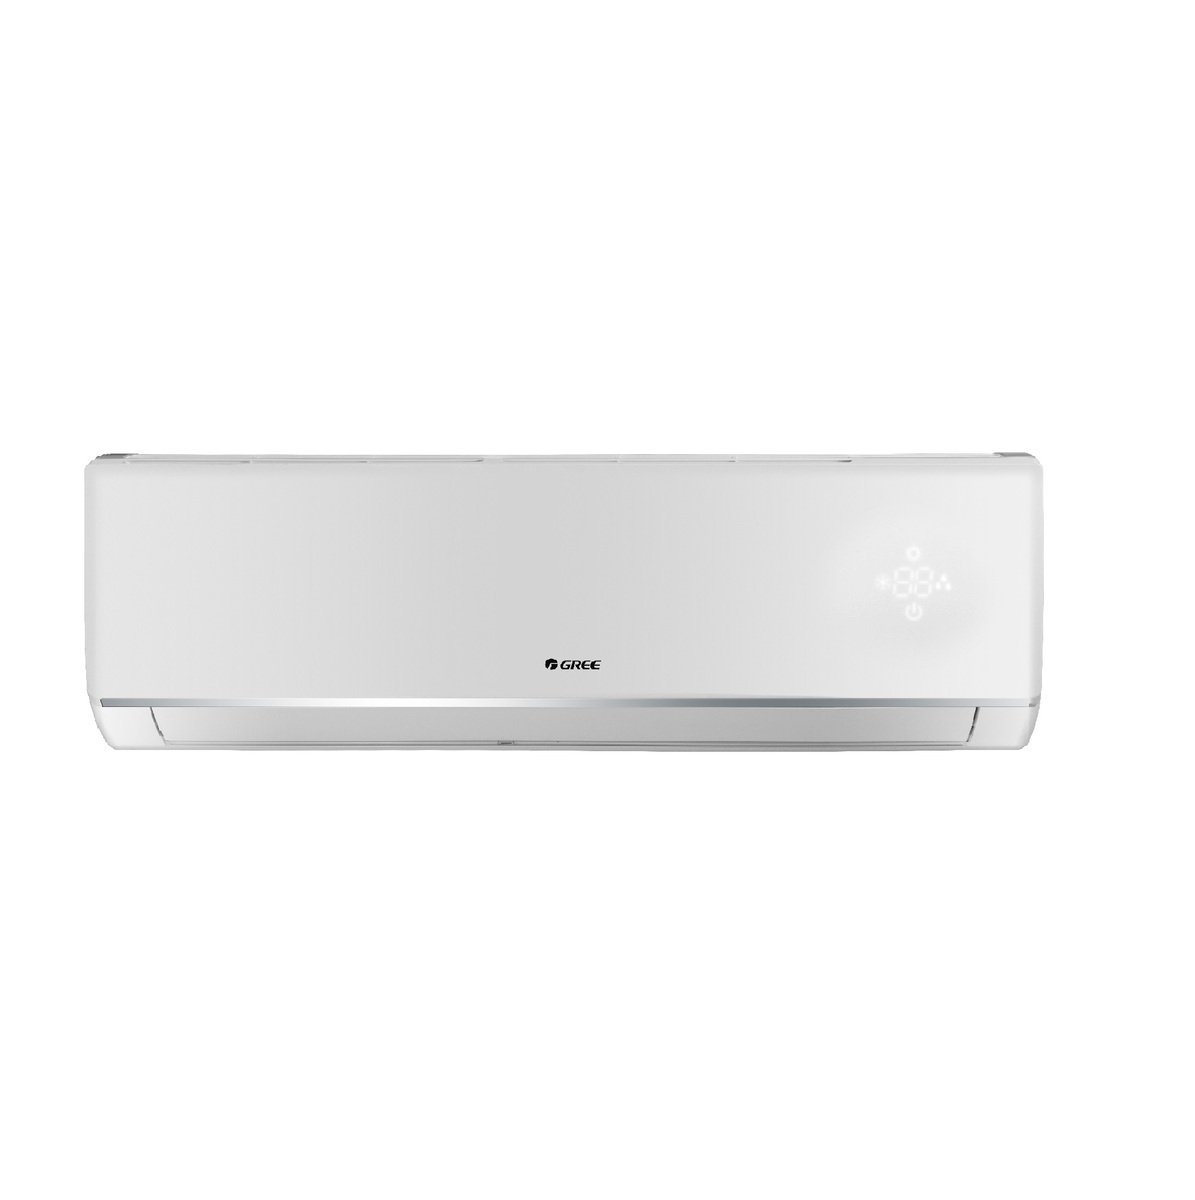 Gree Split Air Conditioner R4`matic-R18C3 1.5 Ton With Rotary Compressor